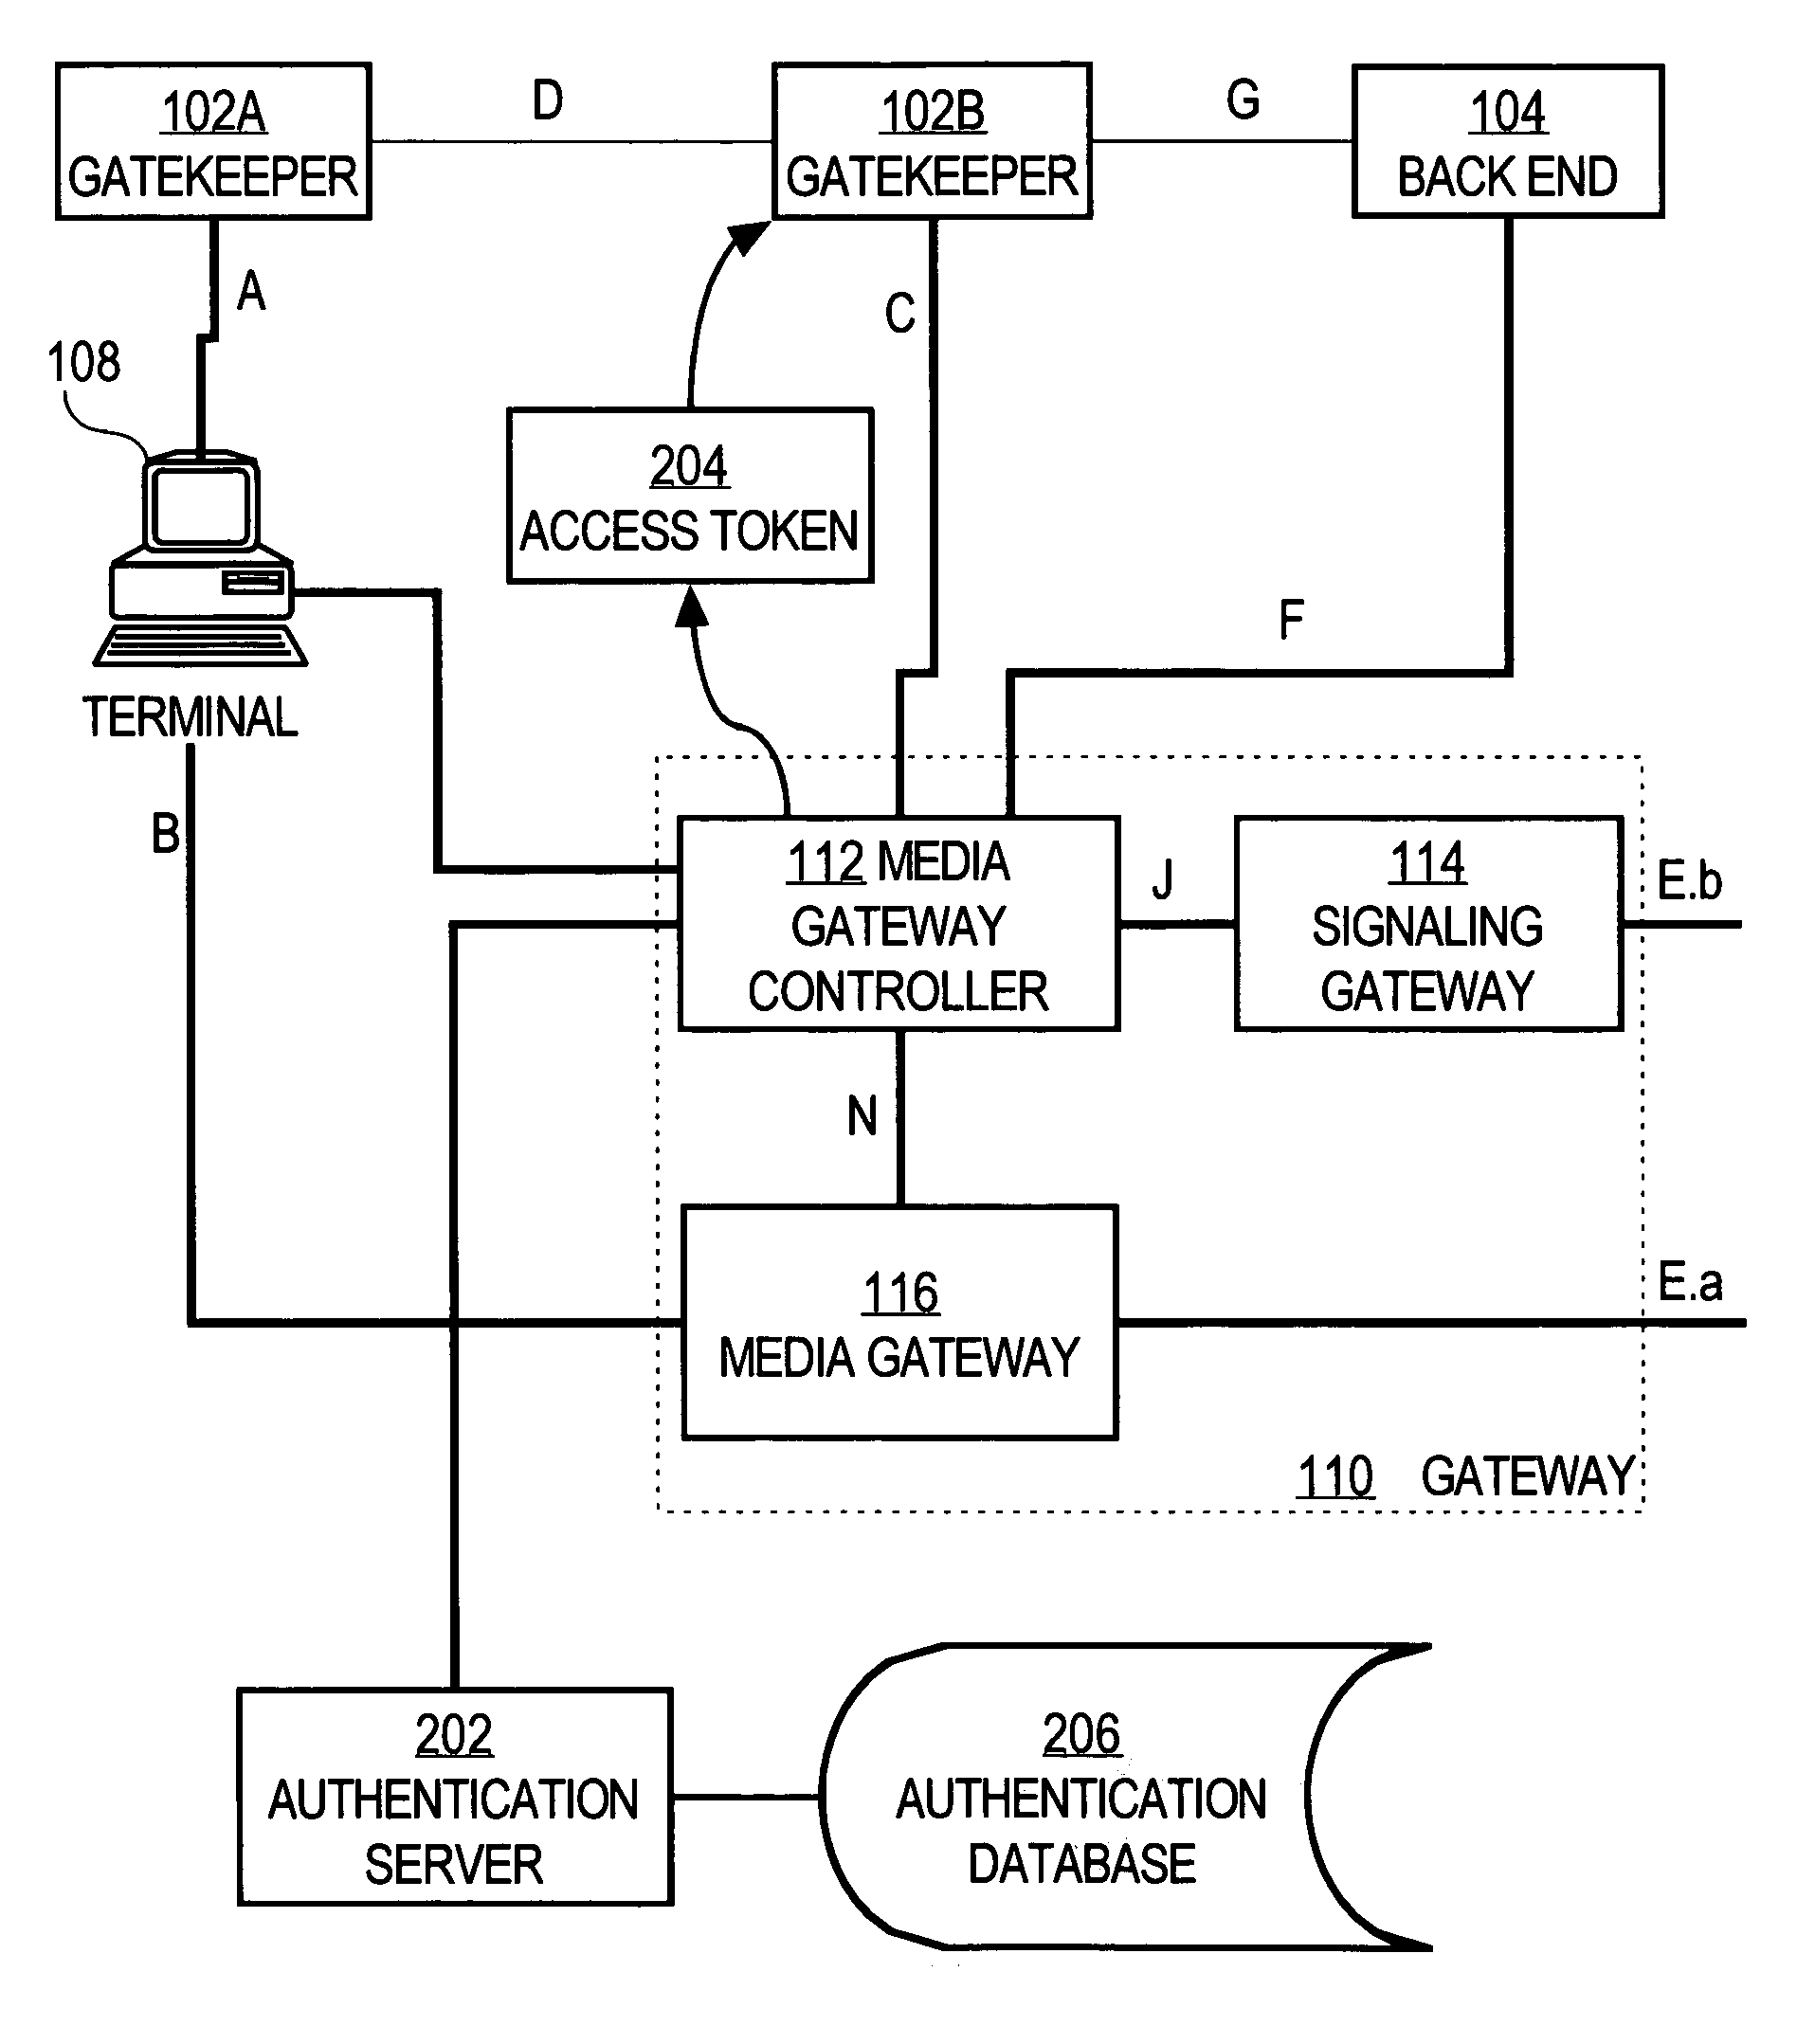 Authenticating endpoints of a voice over internet protocol call connection